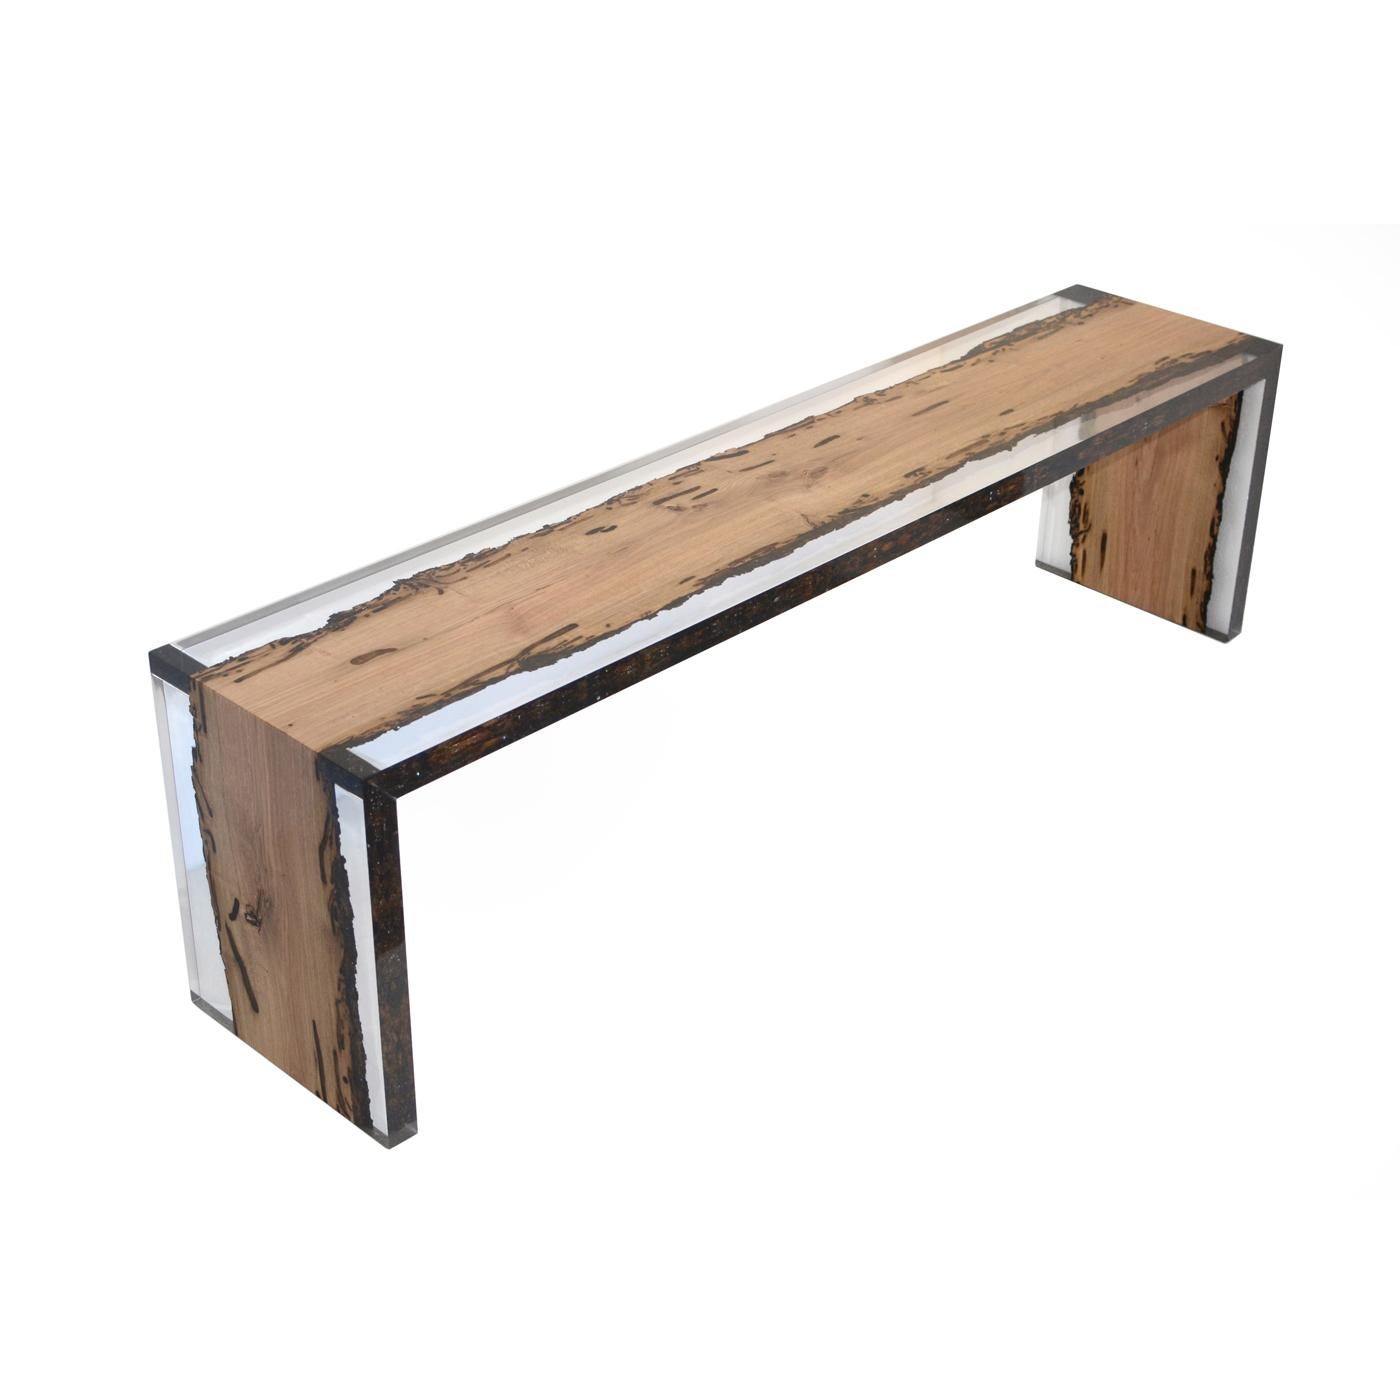 This elegant bench is made using a single plank of oak wood reclaimed from the Venetian laguna cut in three parts. The edges of the plank, aged by salt and water, are preserved in a clear resin that evokes the waters of the canals that have sculpted